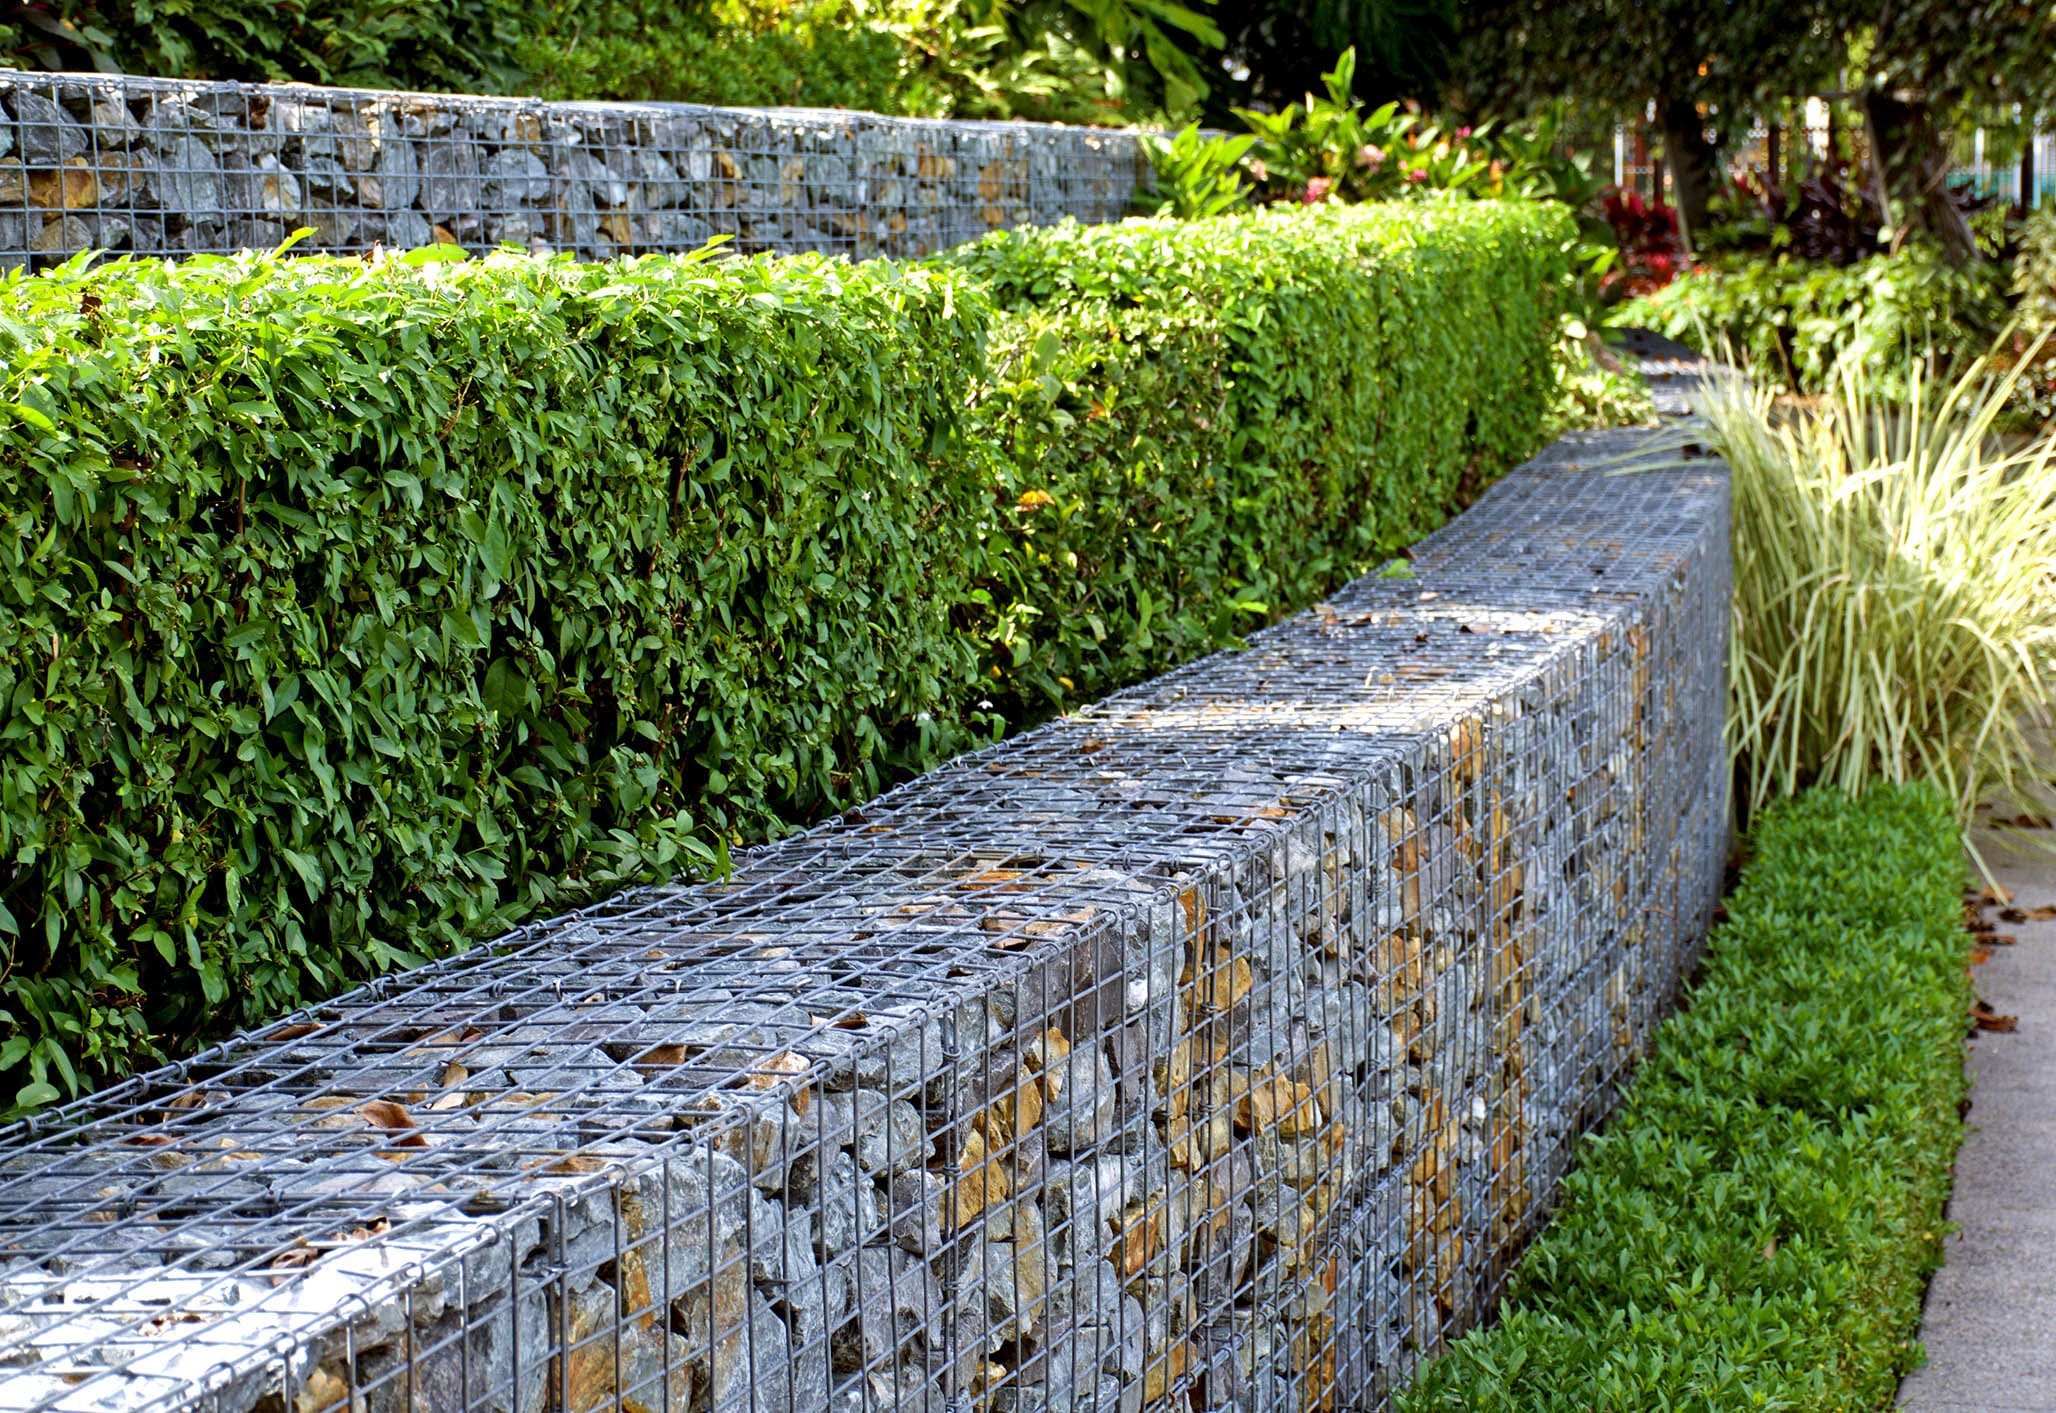 Rock and wire gabions used as retaining walls in a multi tiered garden design